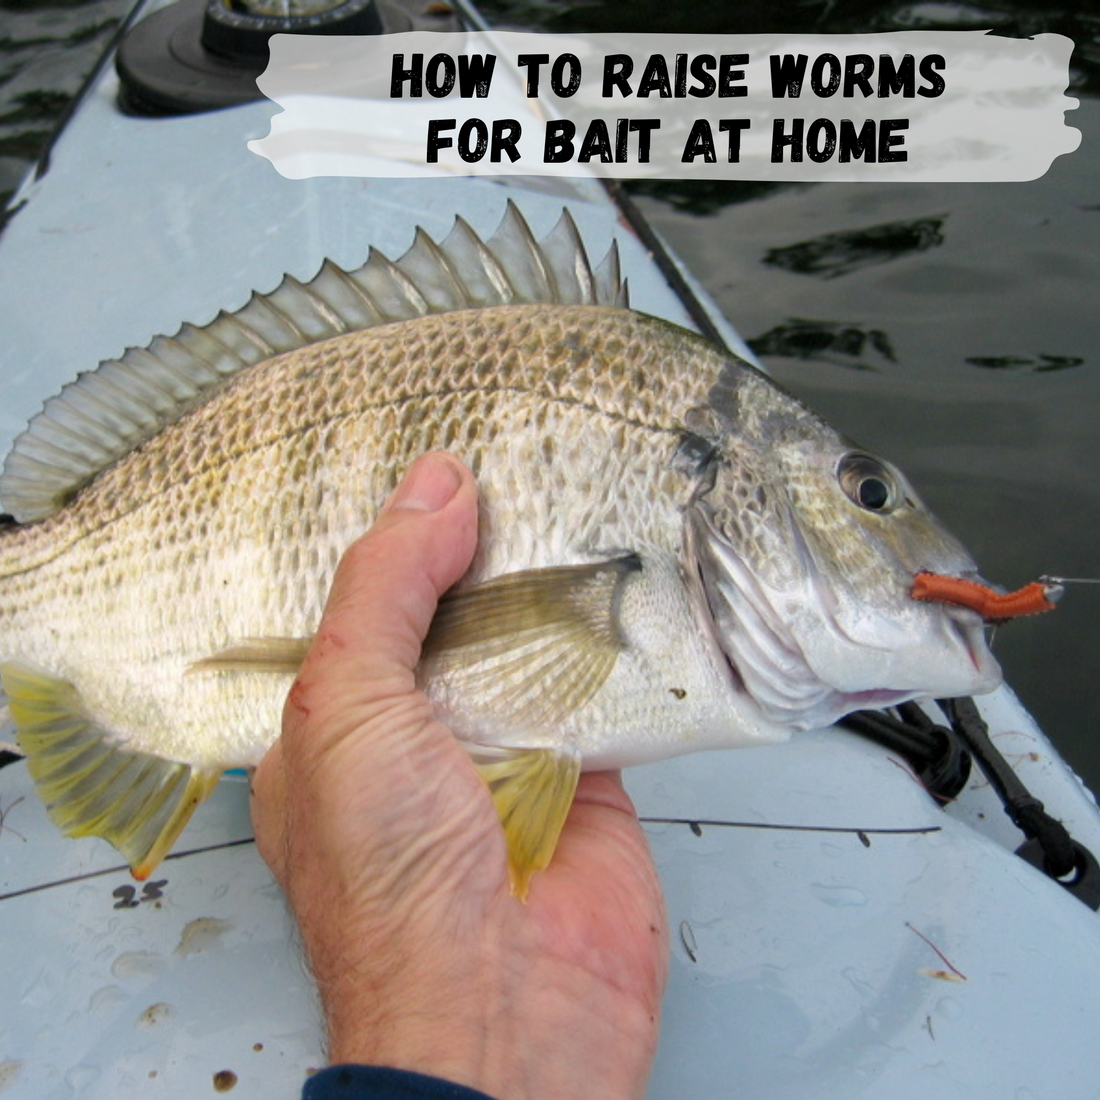 How to Grow Worms as Fishing Bait - Uncle Jim's Worm Farm